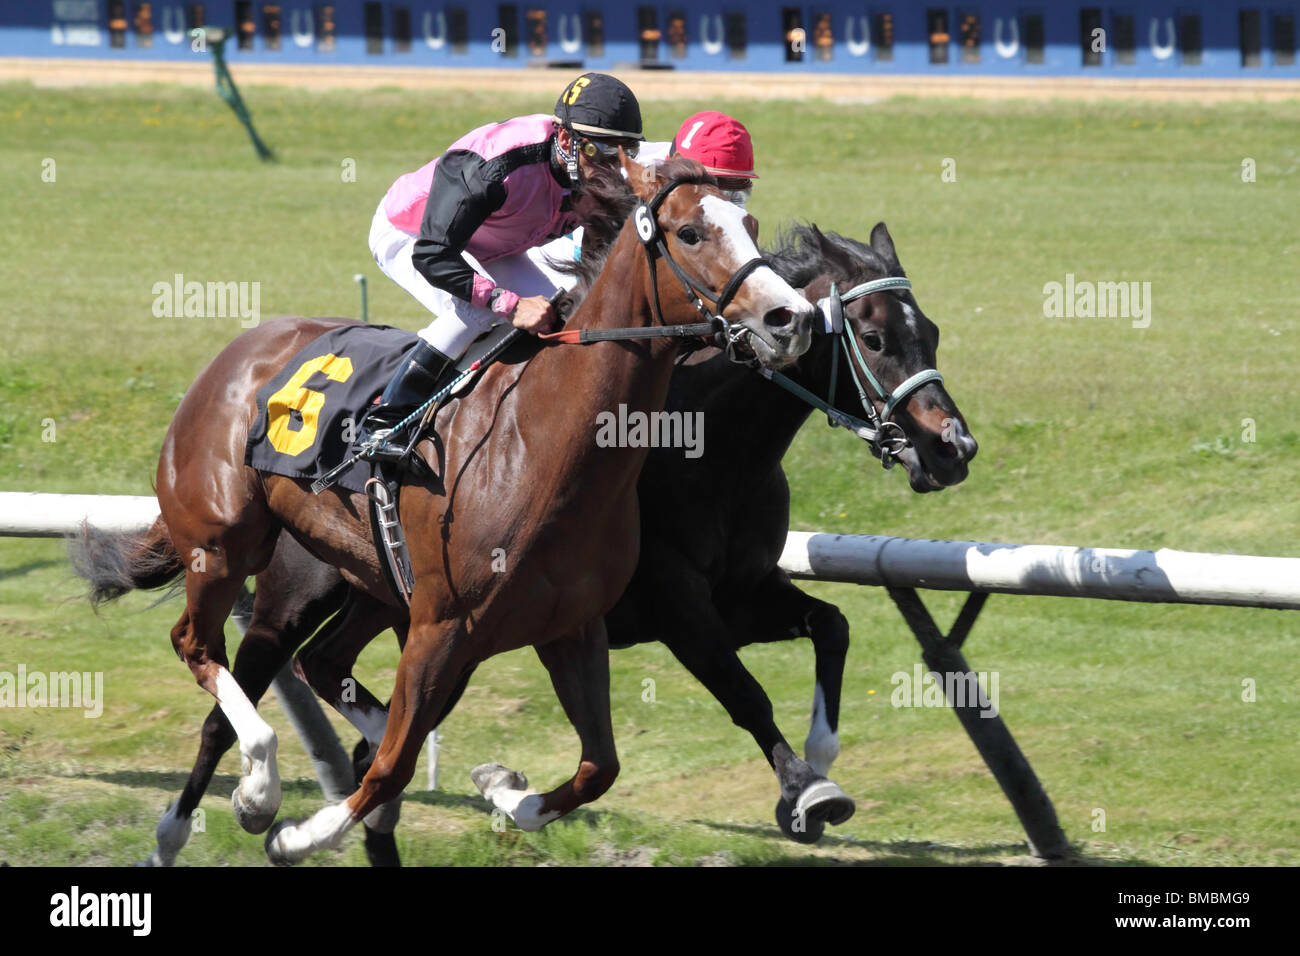 Two race horses going head to head in the last stretch toward the finish line Stock Photo